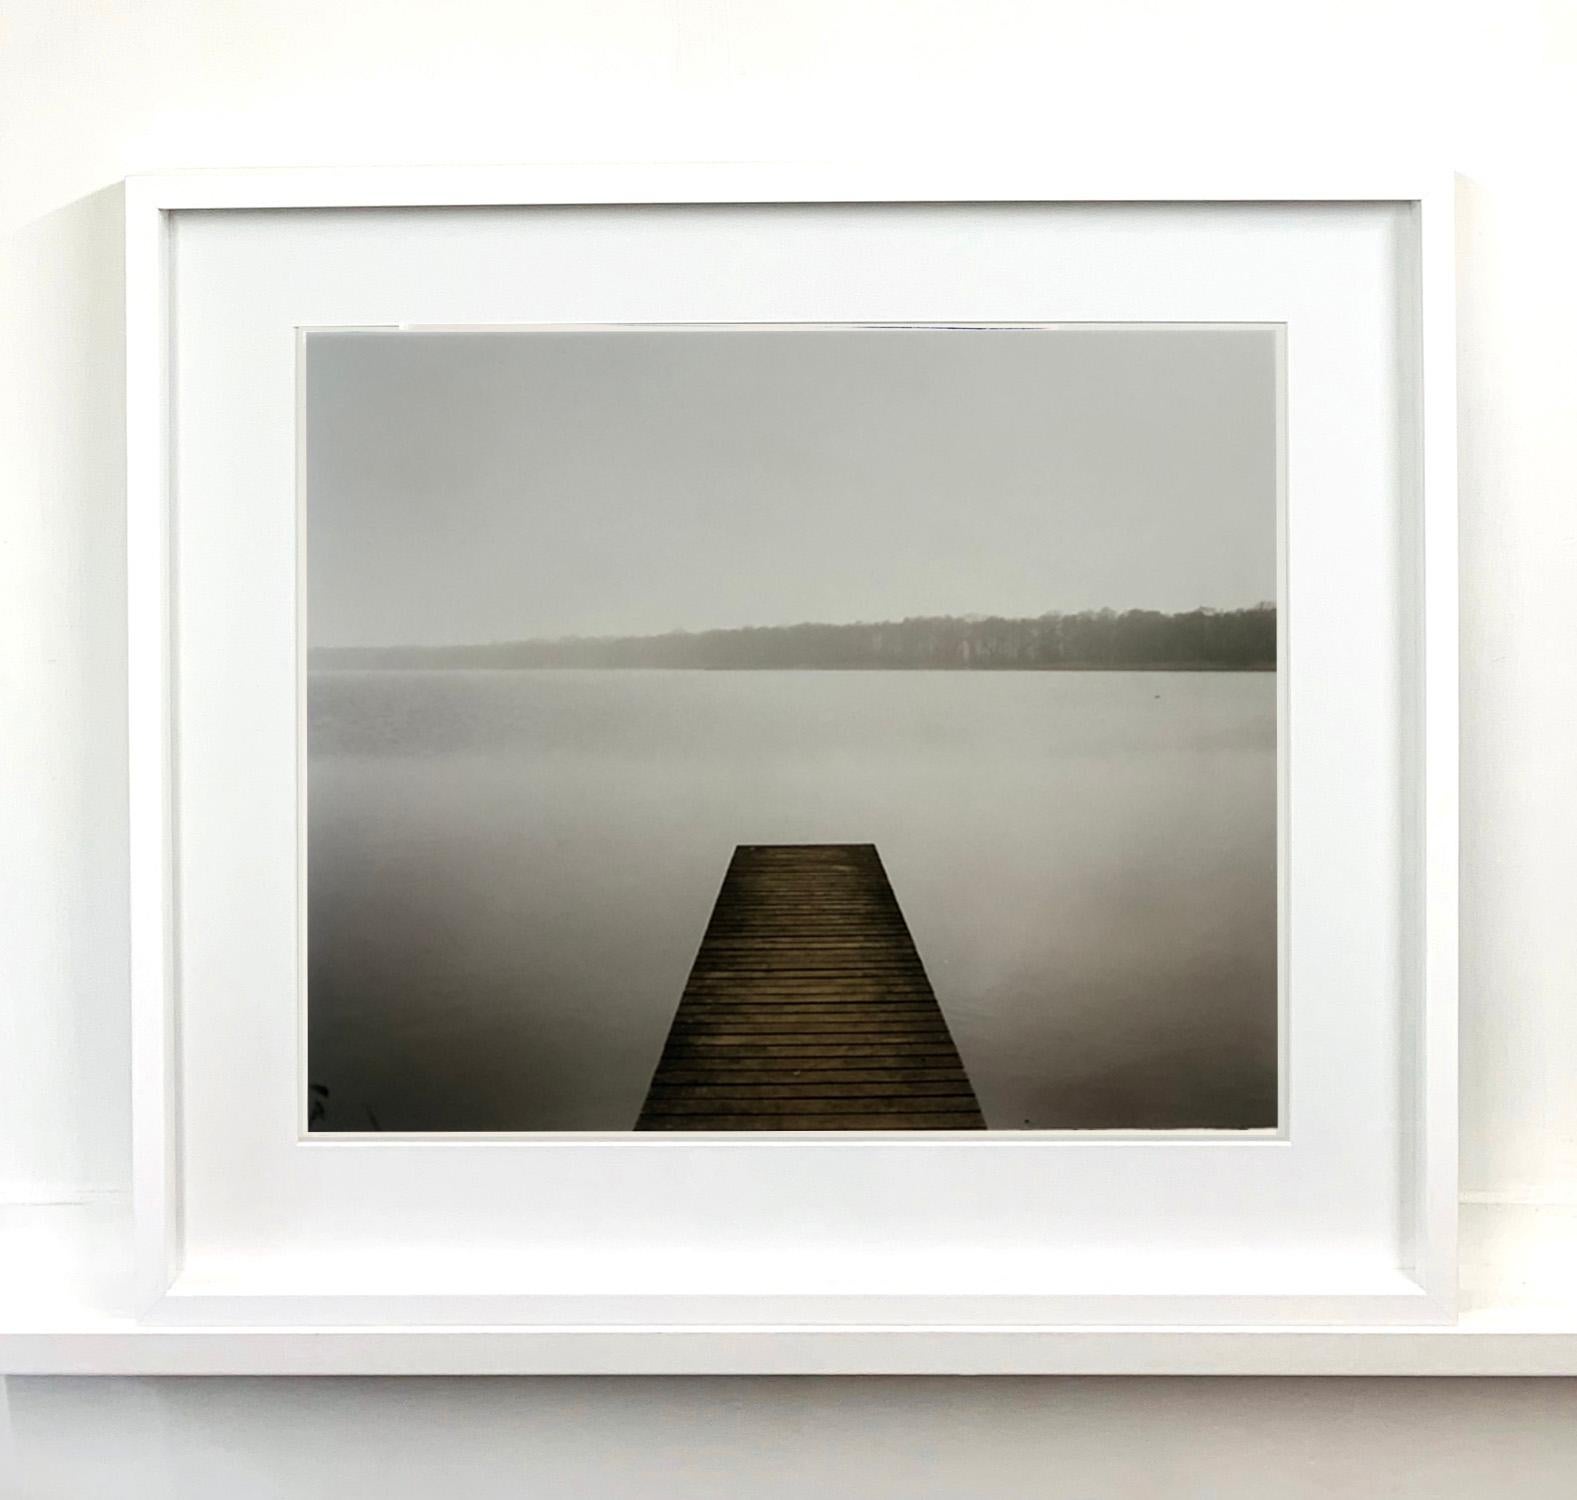 Barton Broad, Norfolk - Neutral waterscape monochrome photography - Photograph by Richard Heeps